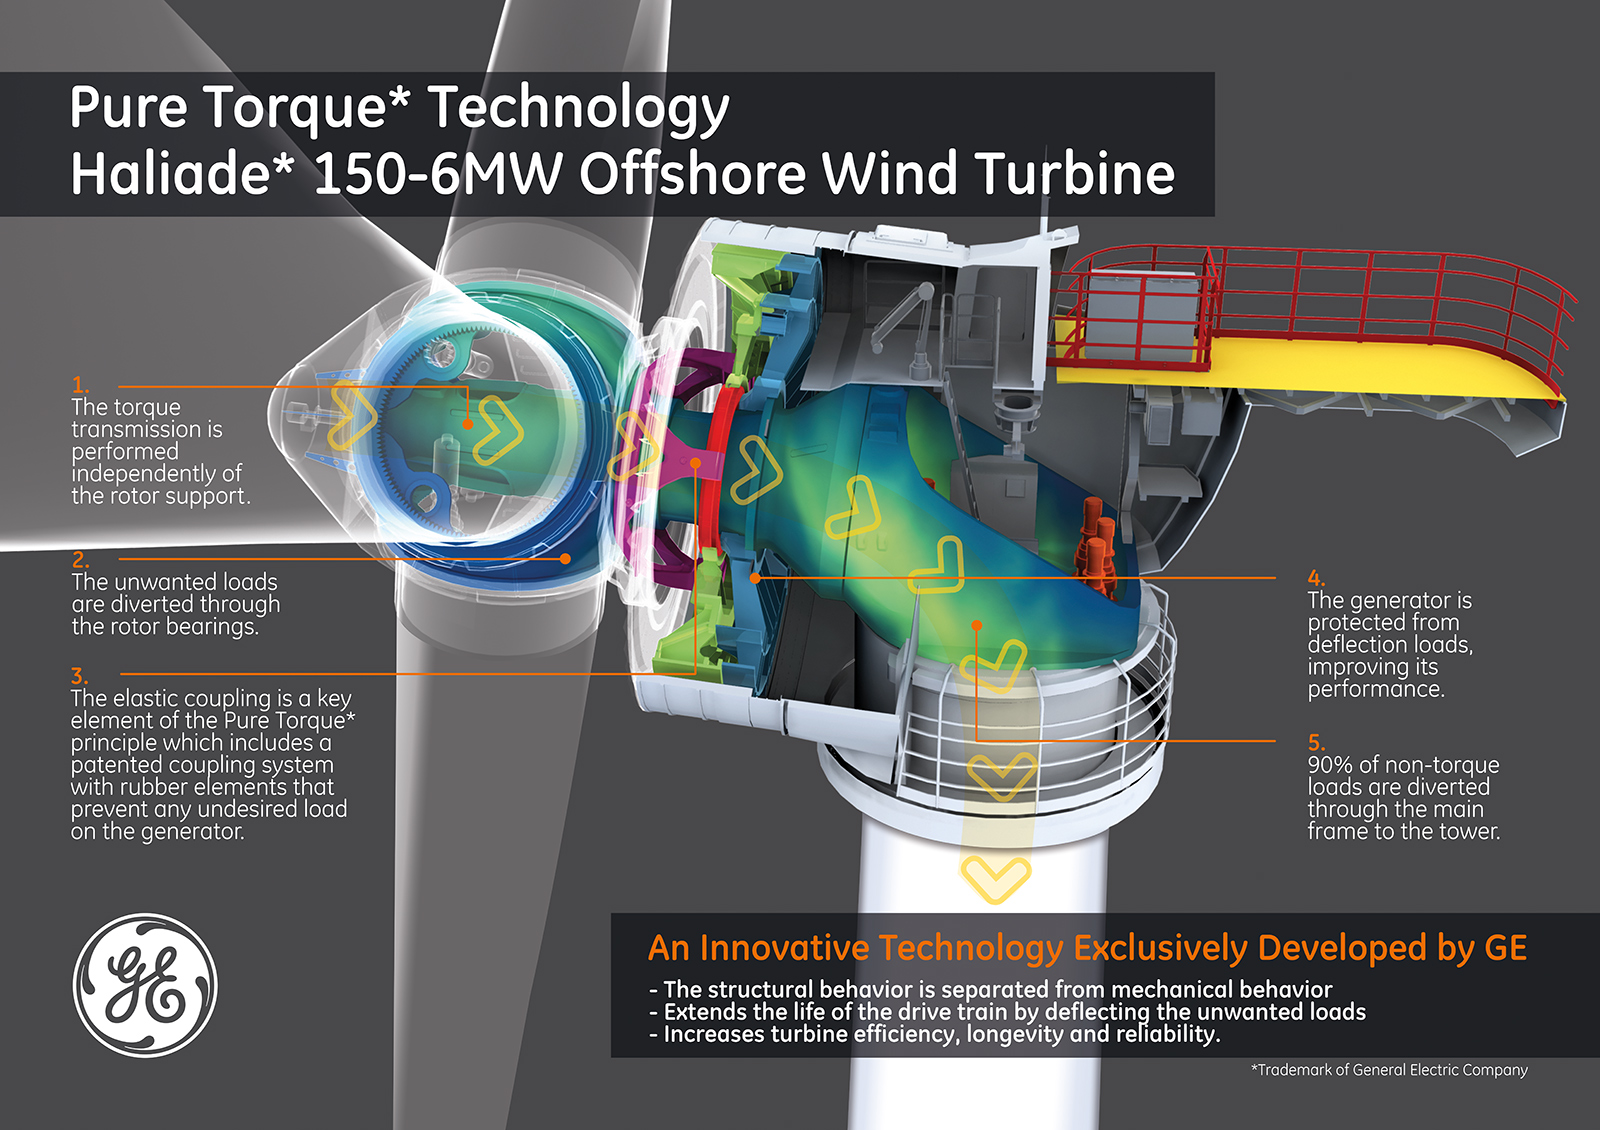 GE-Poster-Wind-Offshore-Haliade-Pure-Torque-Low-Res